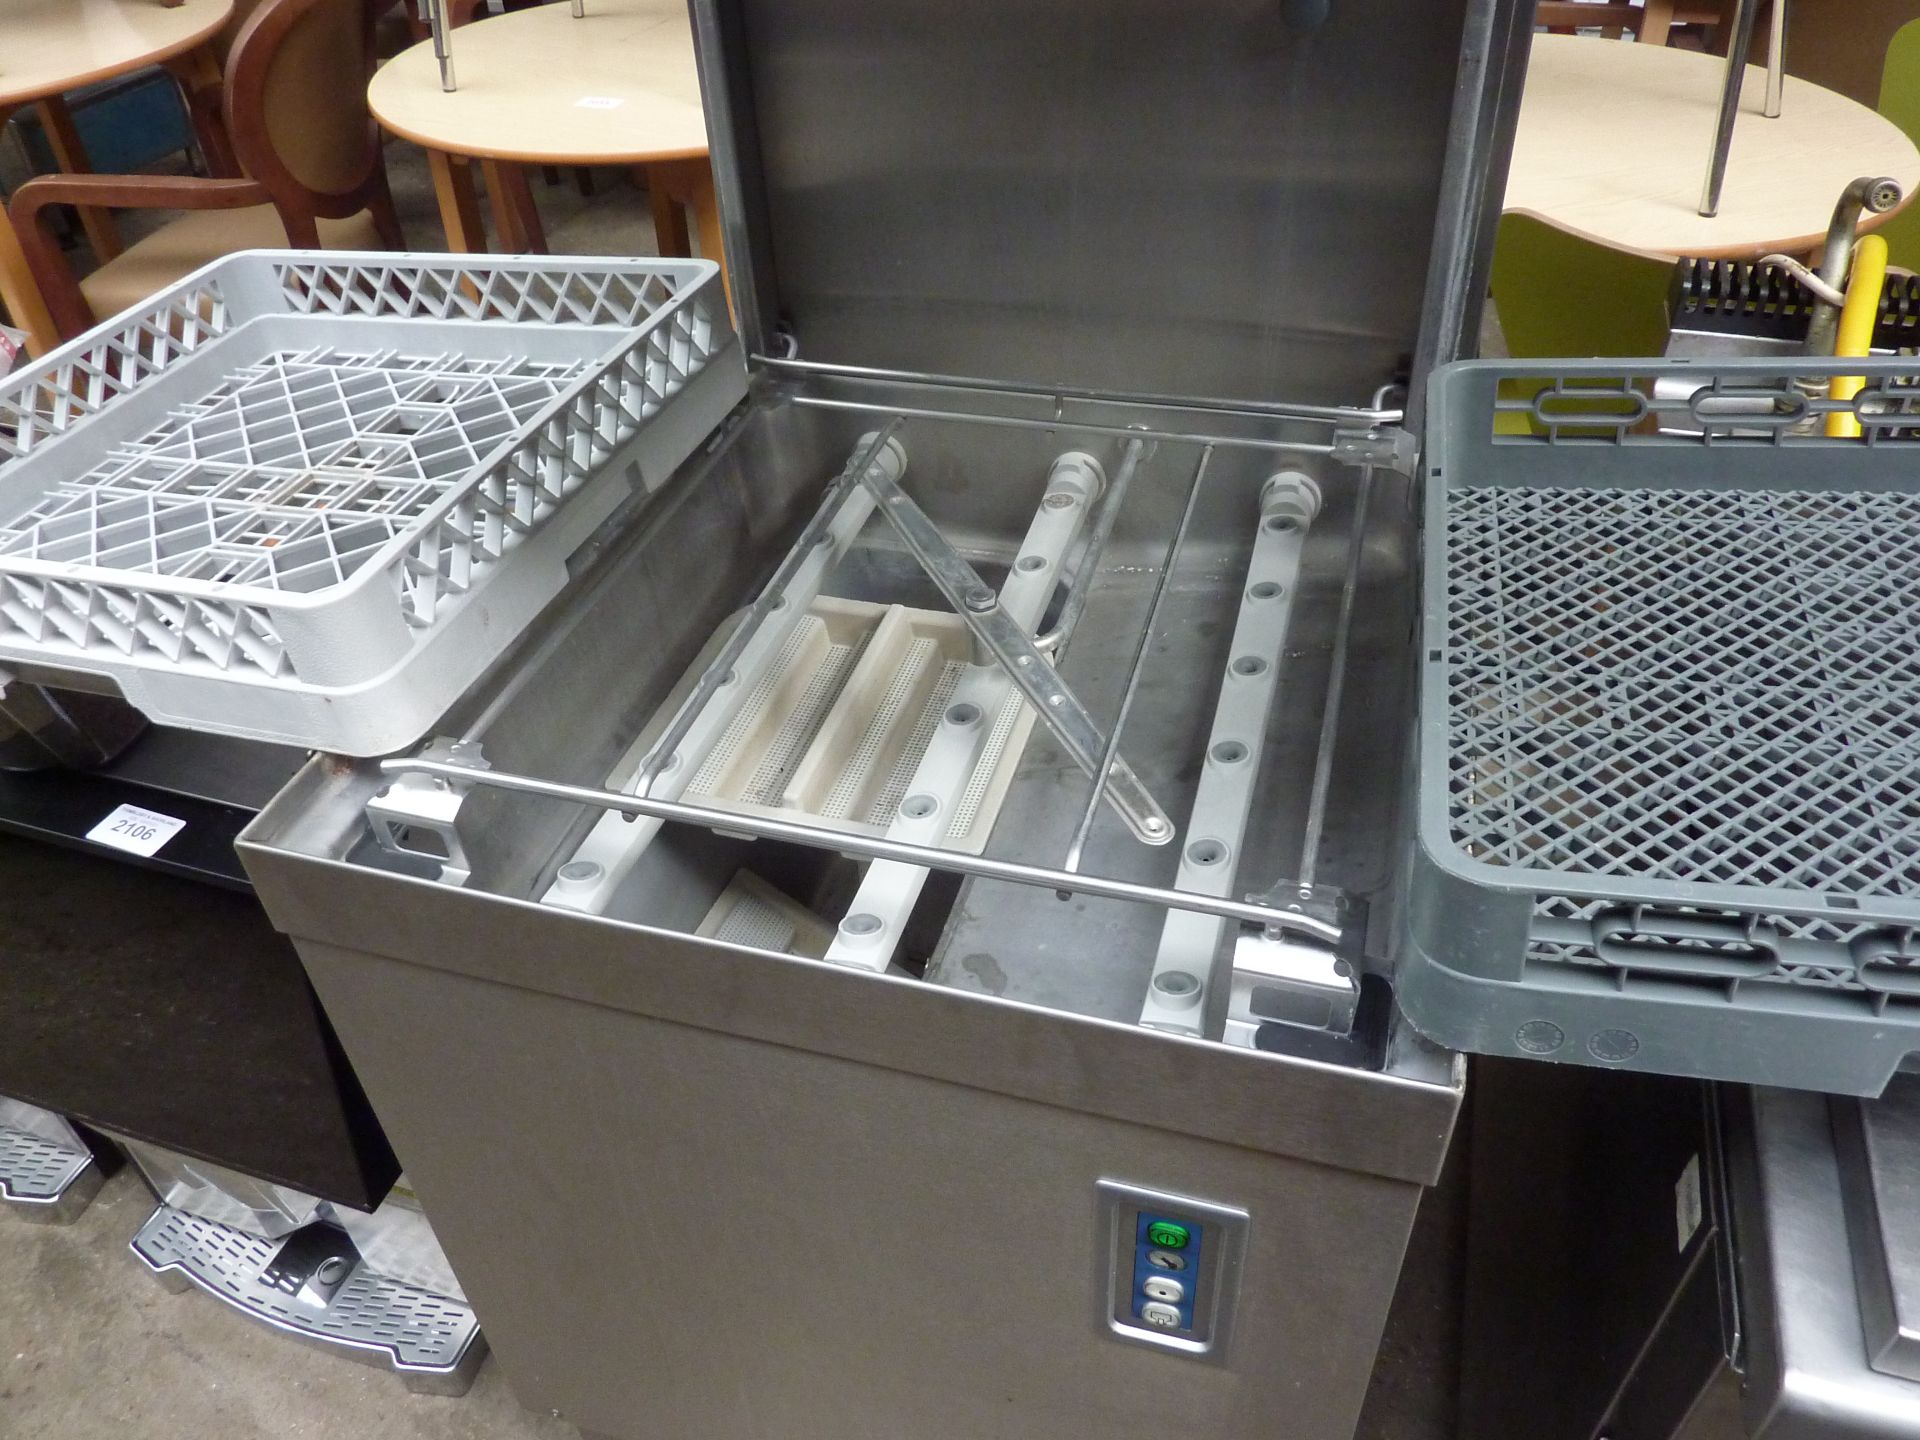 Winterhalter GS501 pass through commercial dishwasher - Image 2 of 2